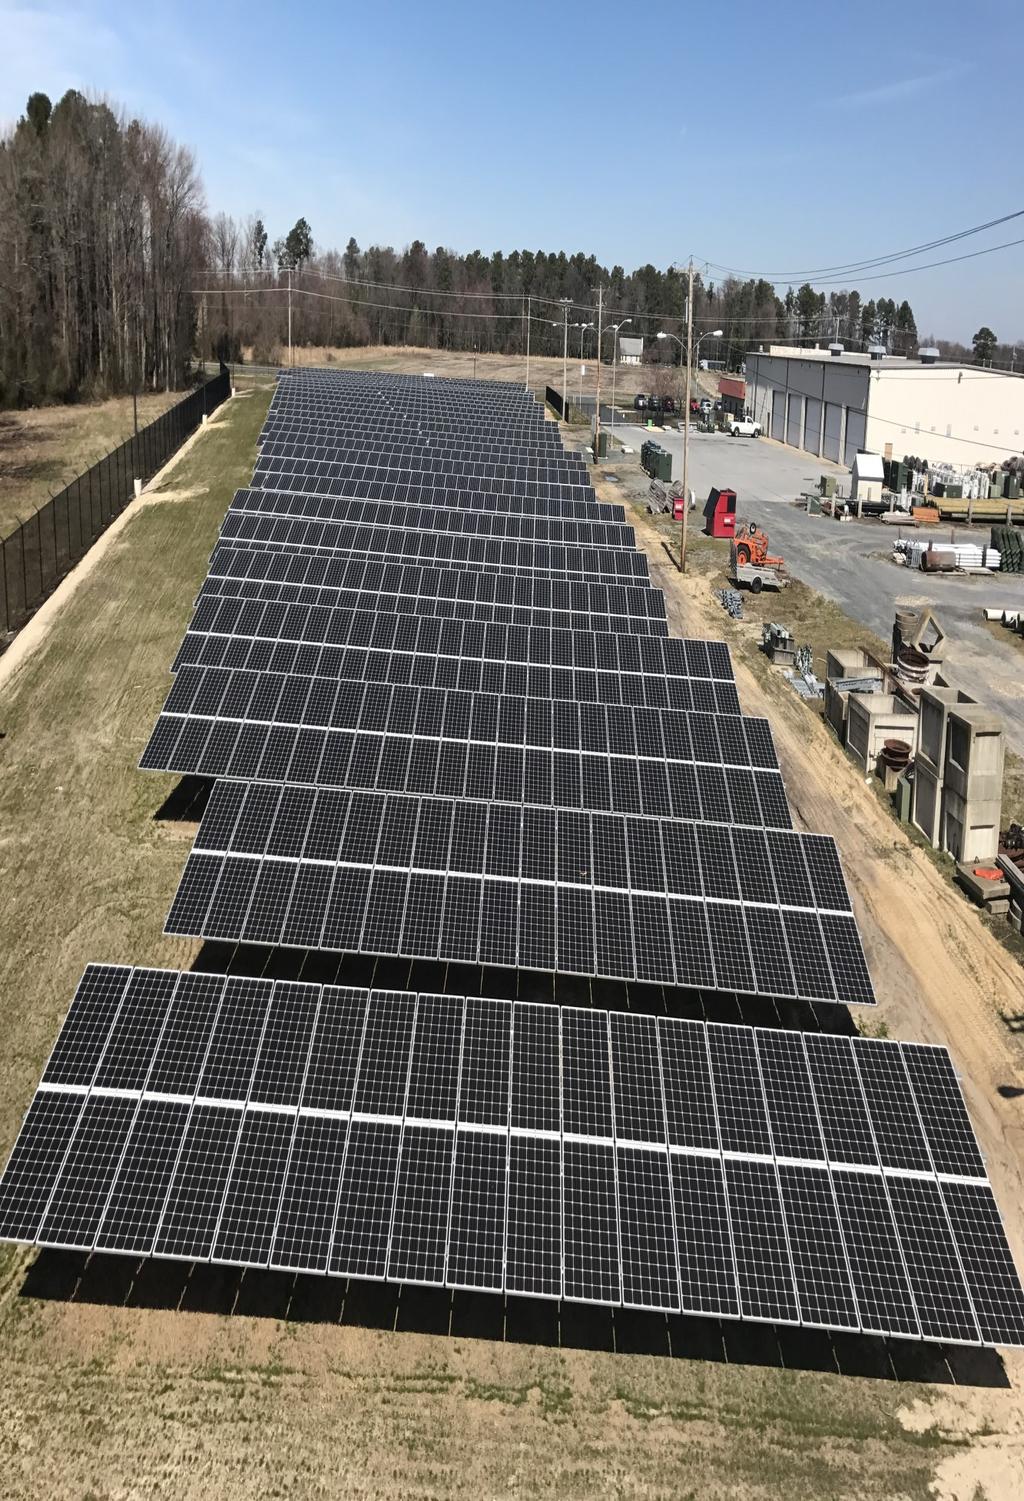 Solar Array Project Completed The City of Seaford has completed a solar array located at 8000 Herring Run Road that was designed to offset electrical cost for the City of Seaford Waste Water